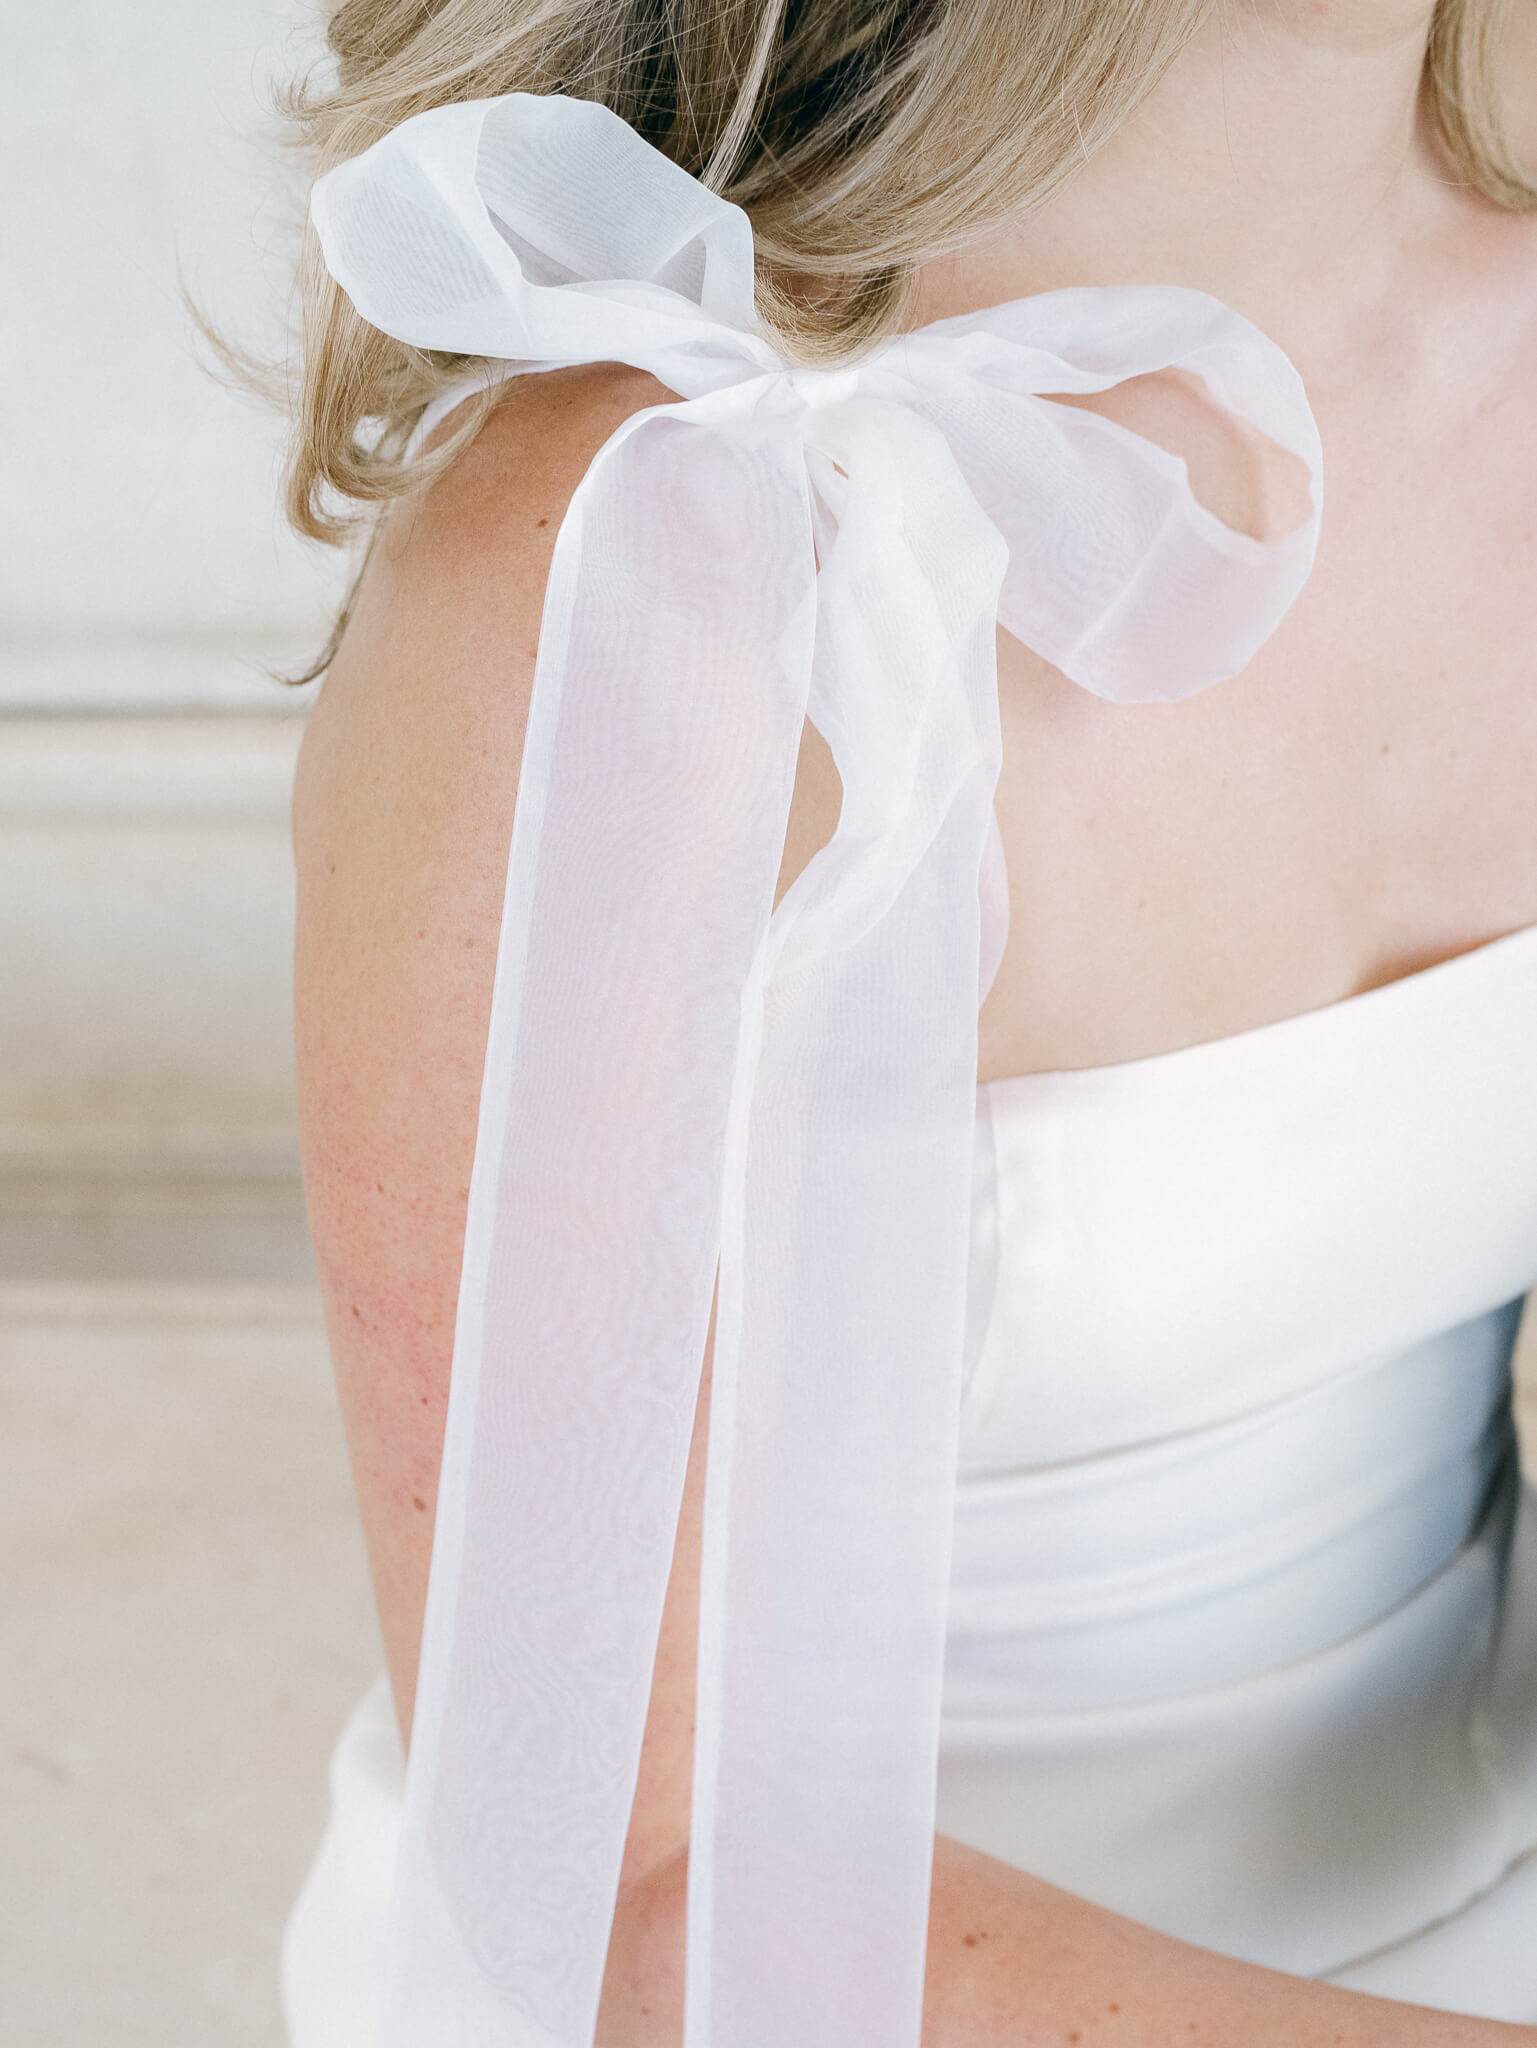 Closeup of a white tulle bow tied on the shoulder of a woman's dress.